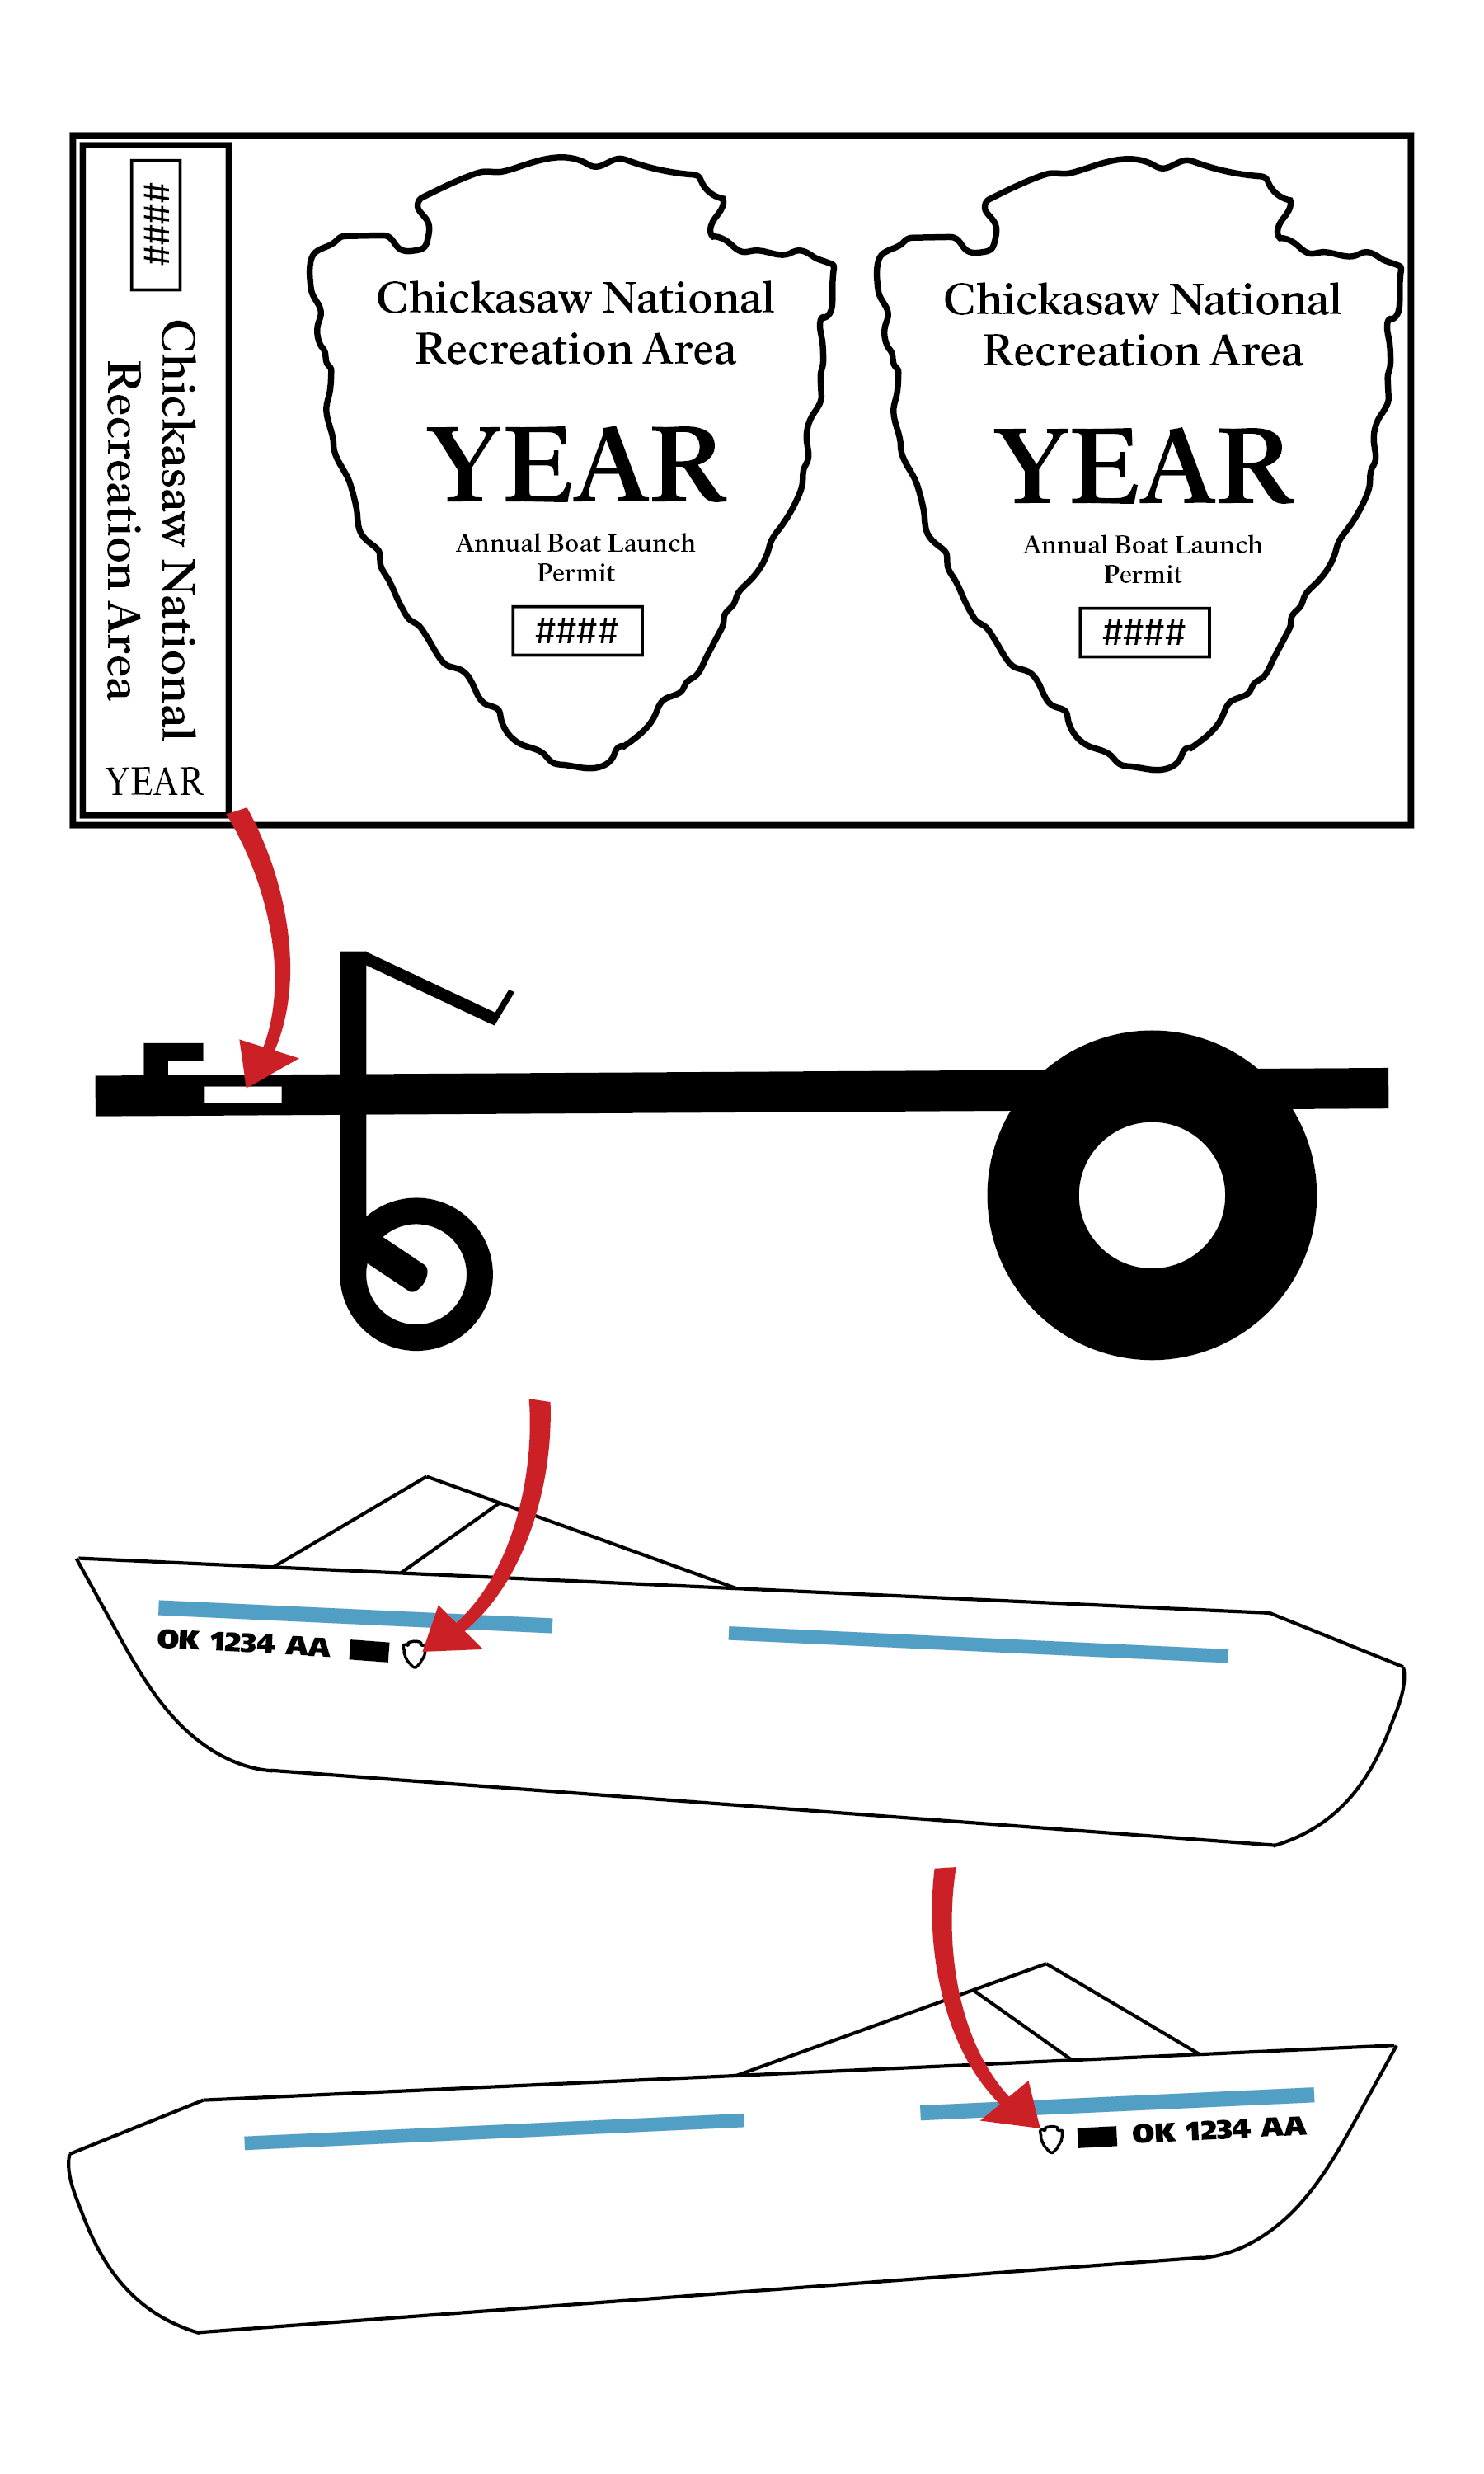 Annual boat launch permit decals come in a set of three. One of the decals is for the drivers side of the boat trailer tongue. The other two are for each side of the boat on the bow.